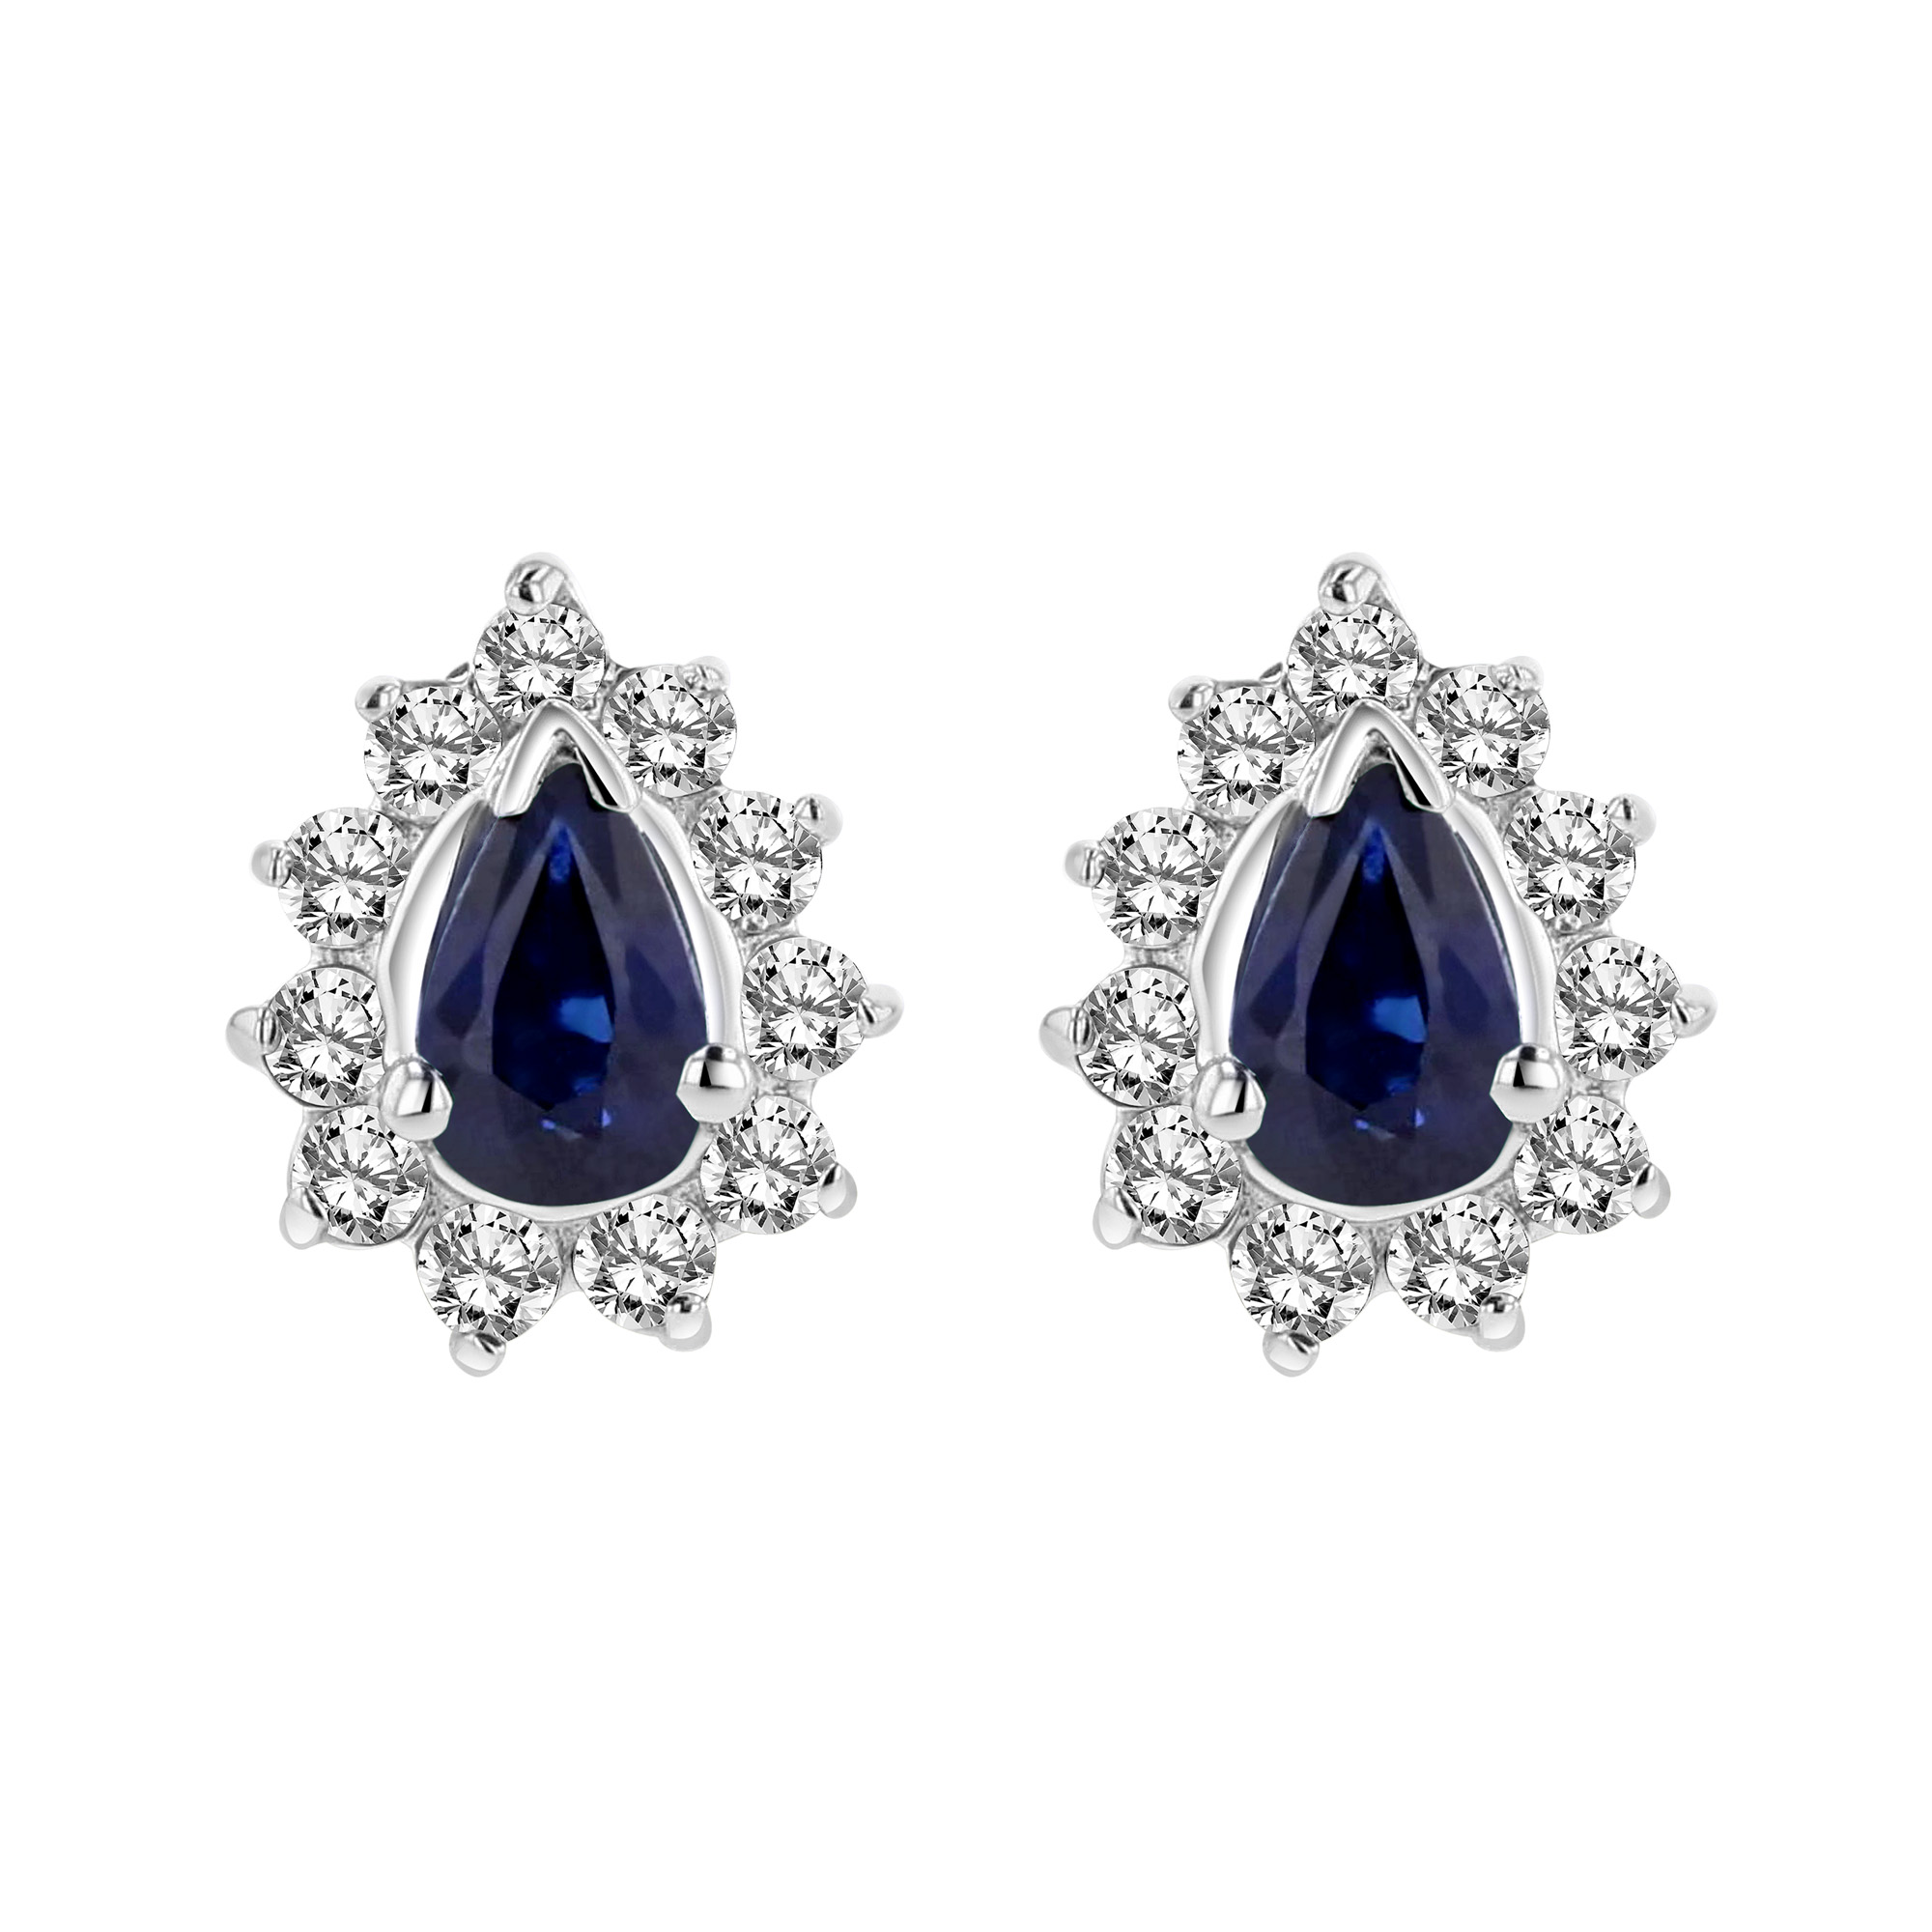 0.80cttw Diamond and Sapphire Earring in 14k Gold